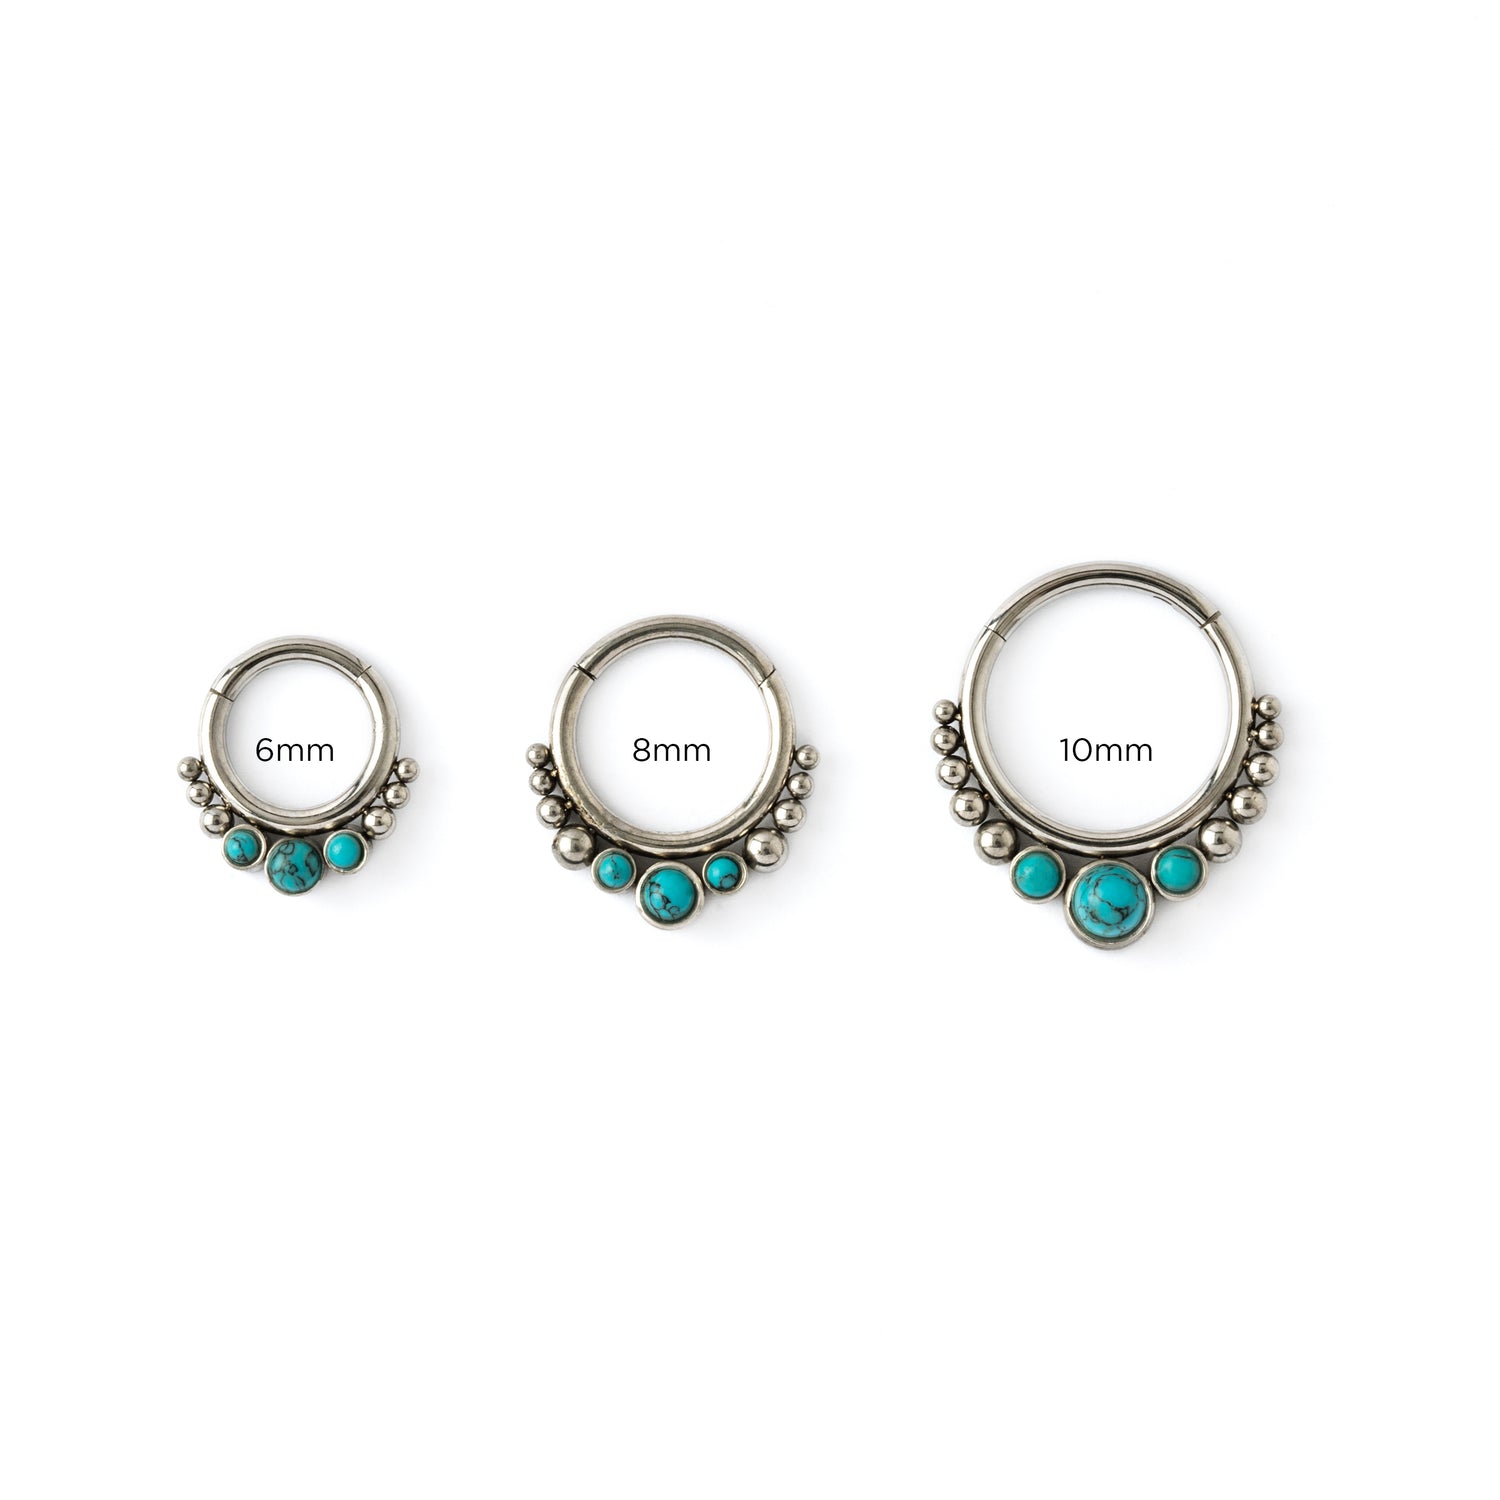 6mm, 8mm &amp; 10mm Surgical steel septum clicker rings with Turquoise frontal view